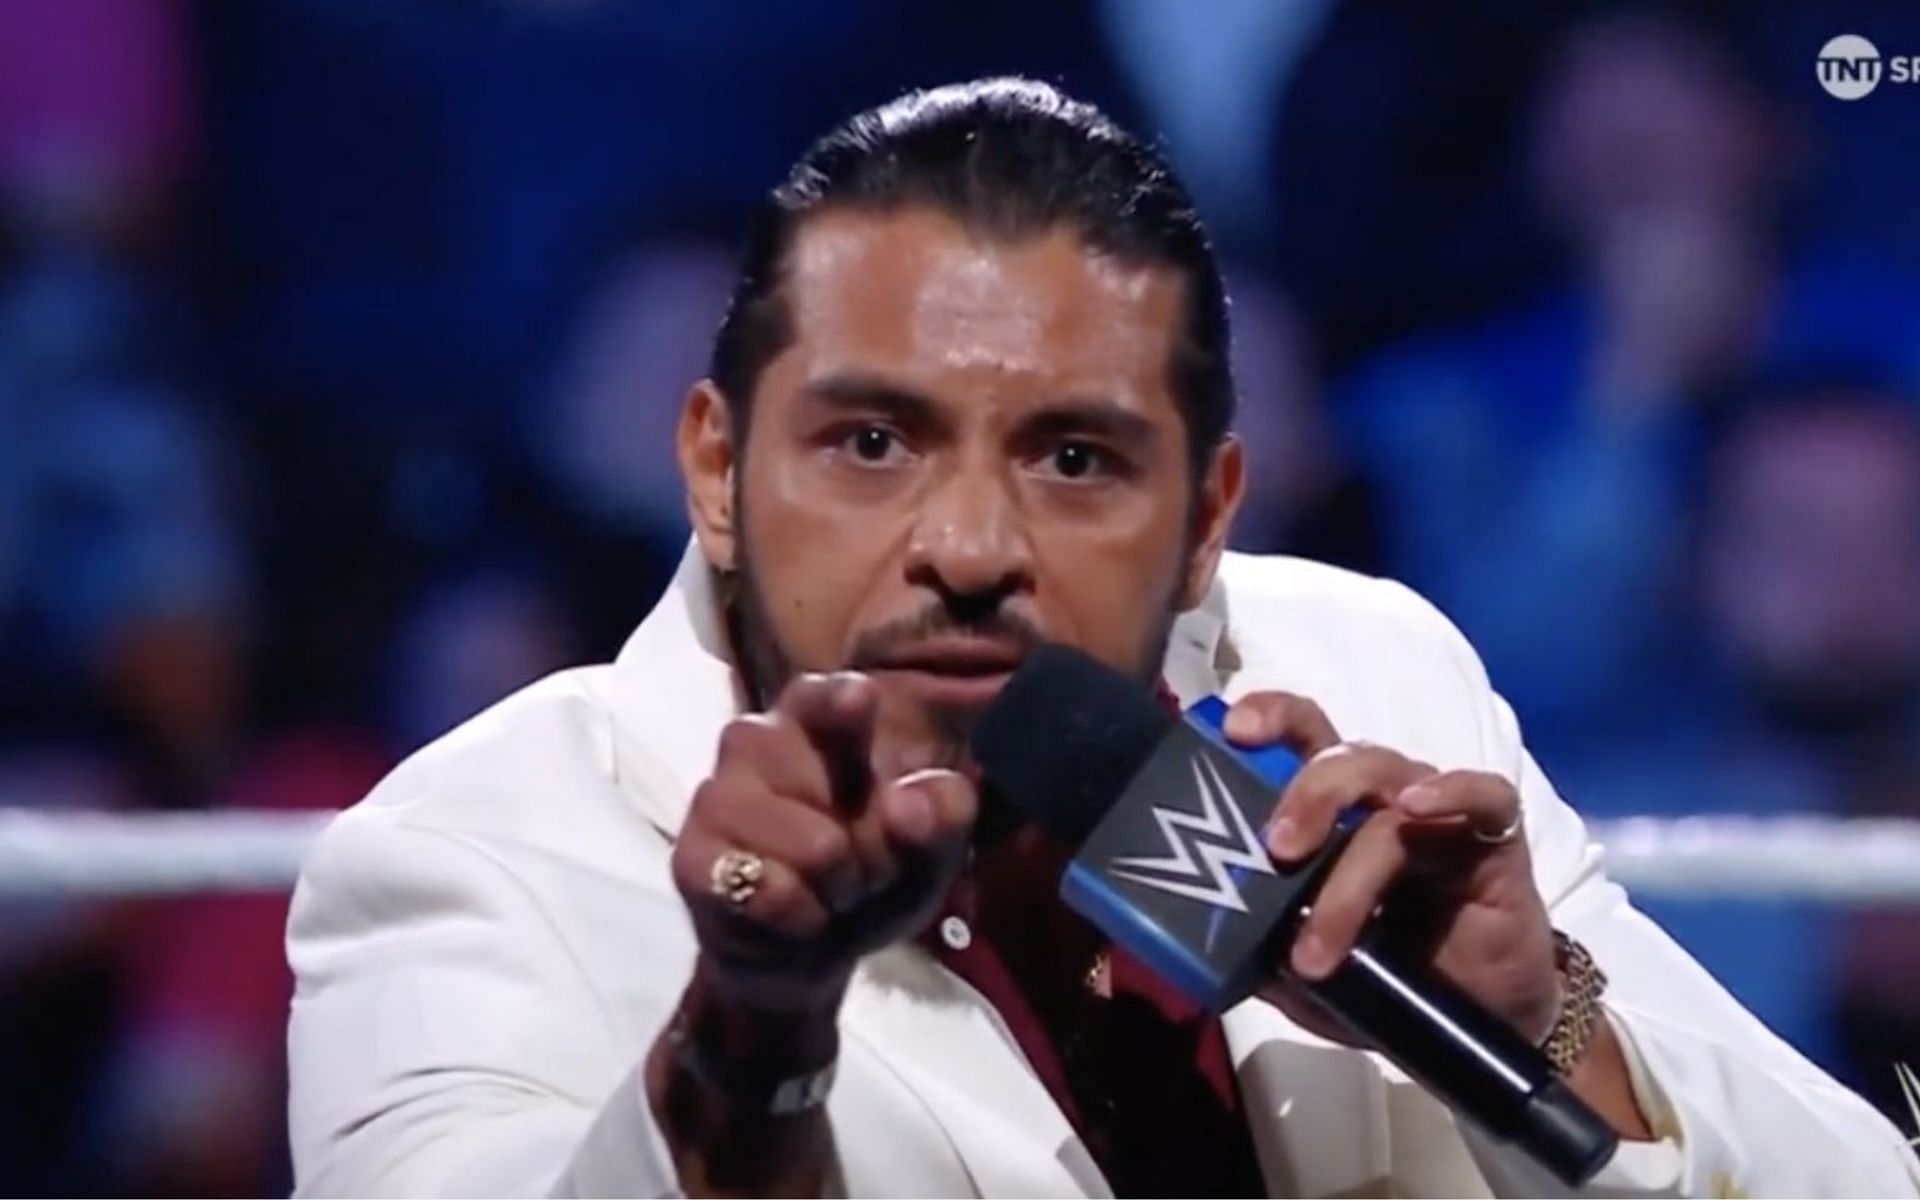 Escobar may now be public enemy #1 in WWE